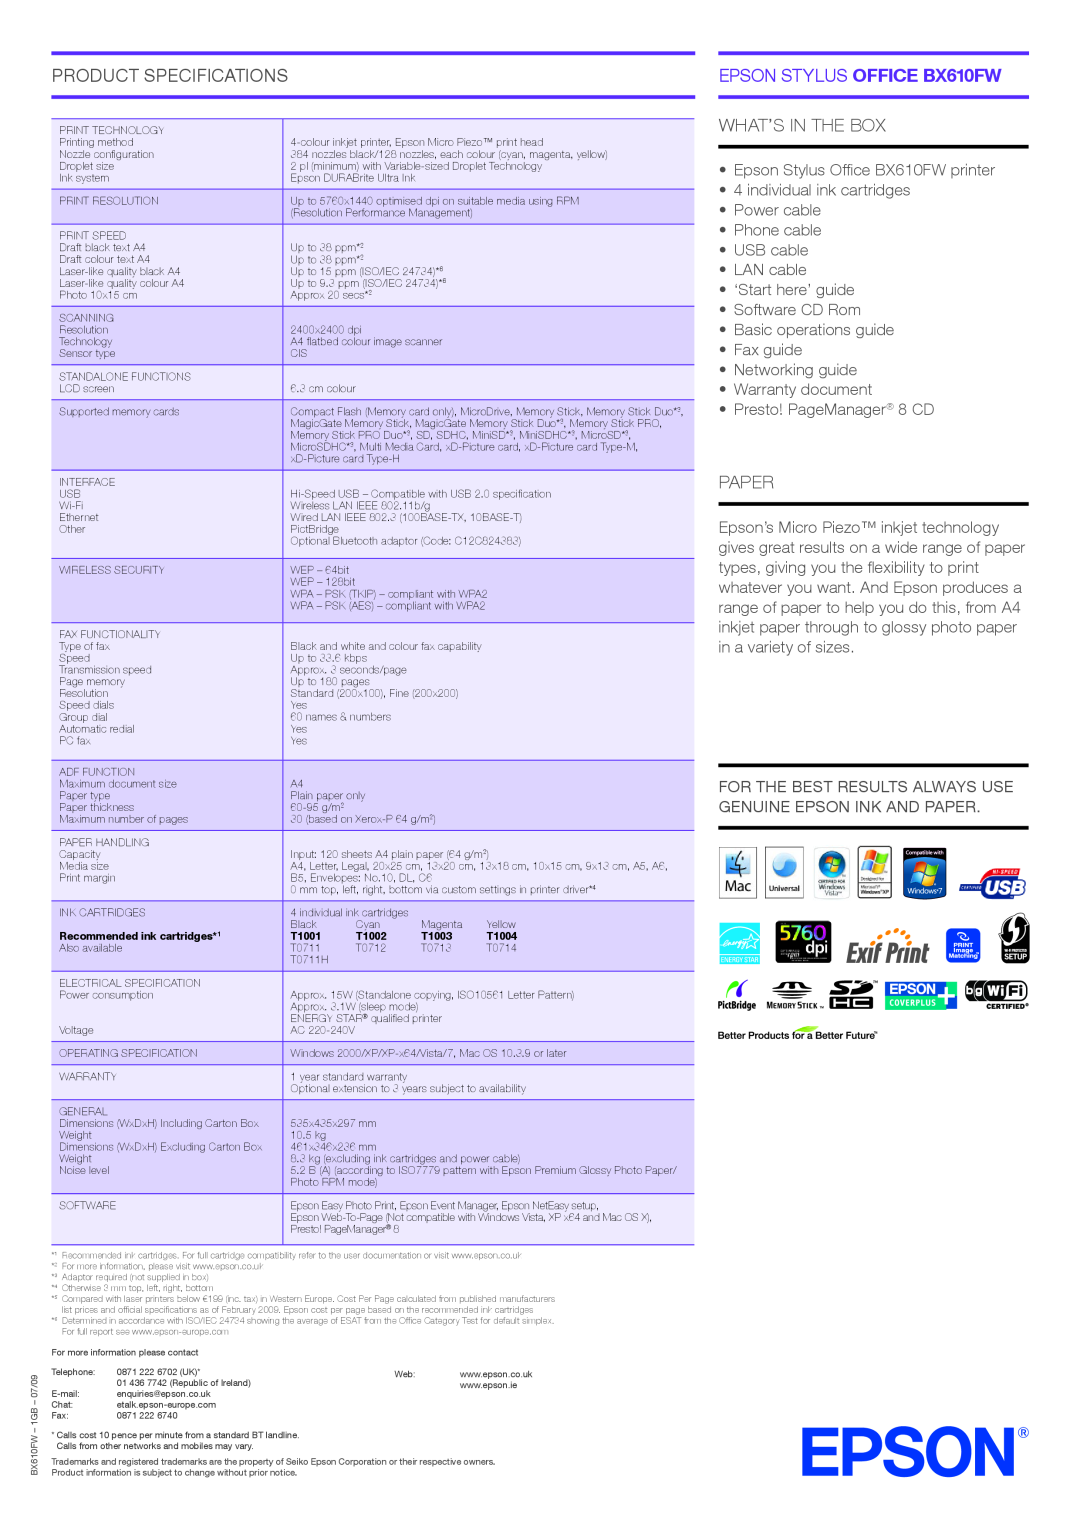 Epson manual Product Specifications, What’S In The Box, Paper, EPSON STYLUS OFFICE BX610FW, Recommended ink cartridges*1 